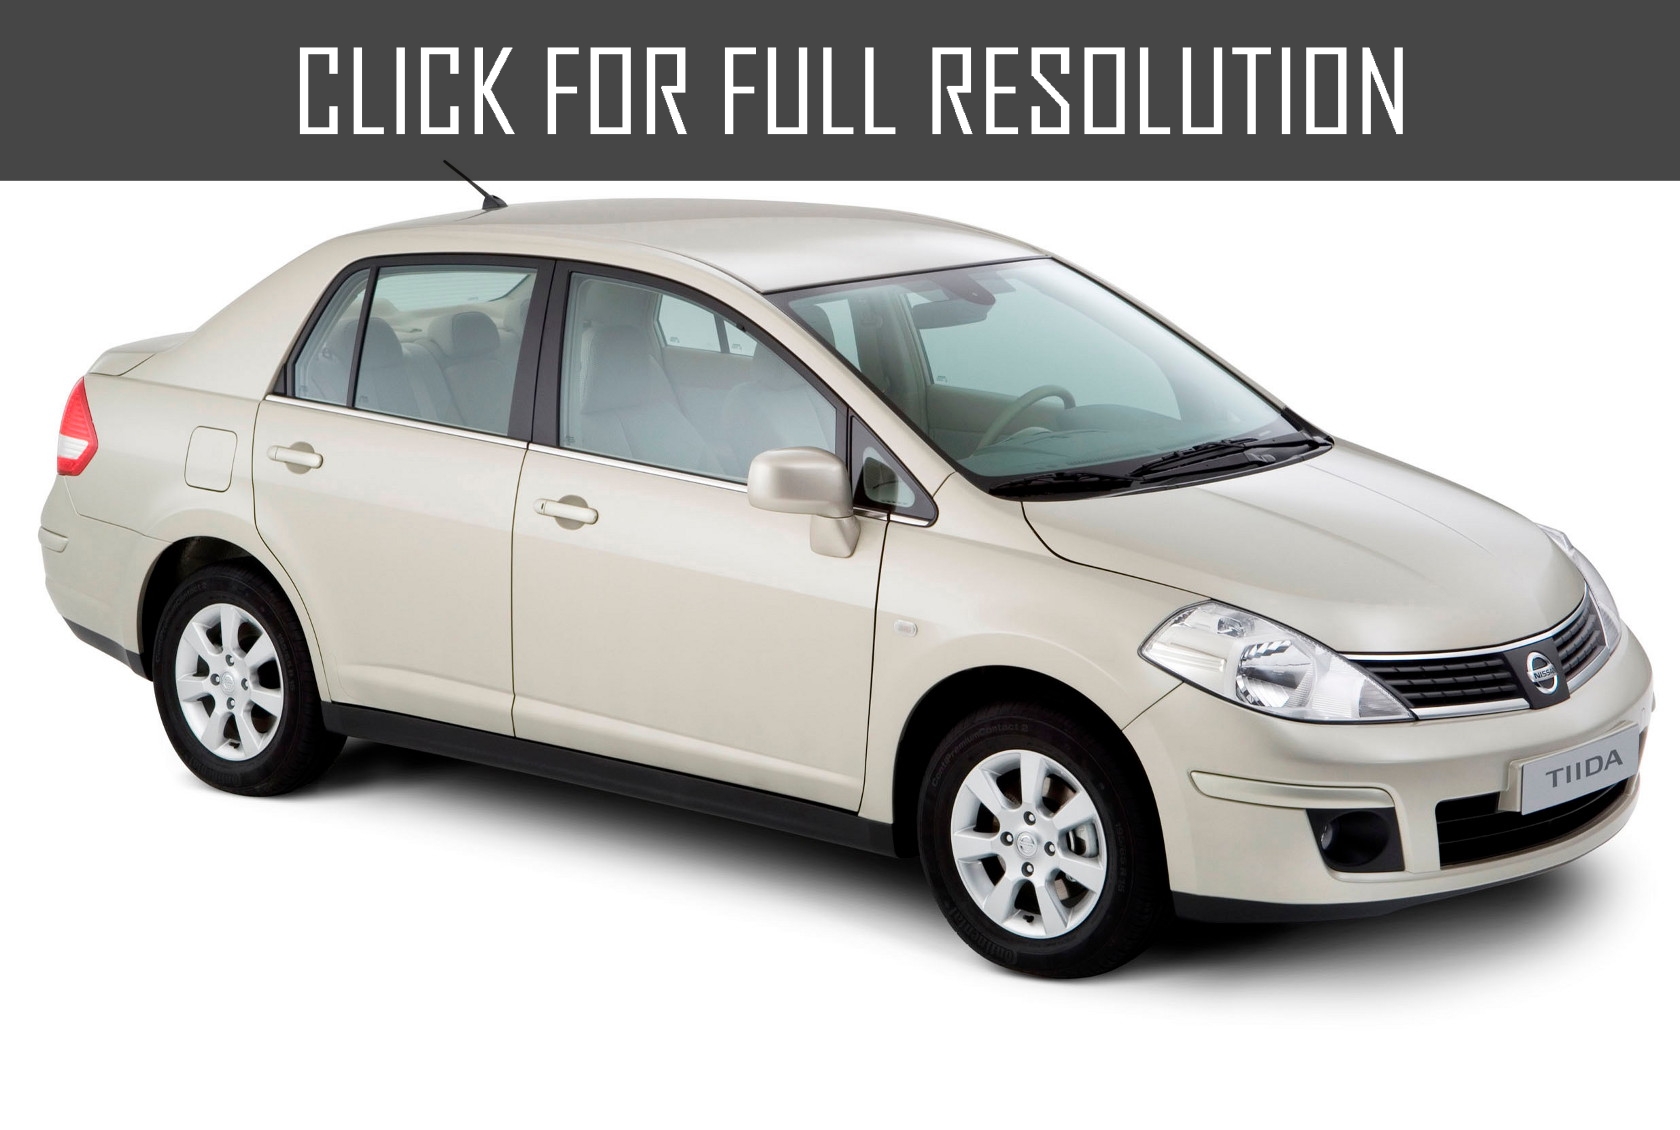 Nissan Tiida 2013 - reviews, prices, ratings with various photos